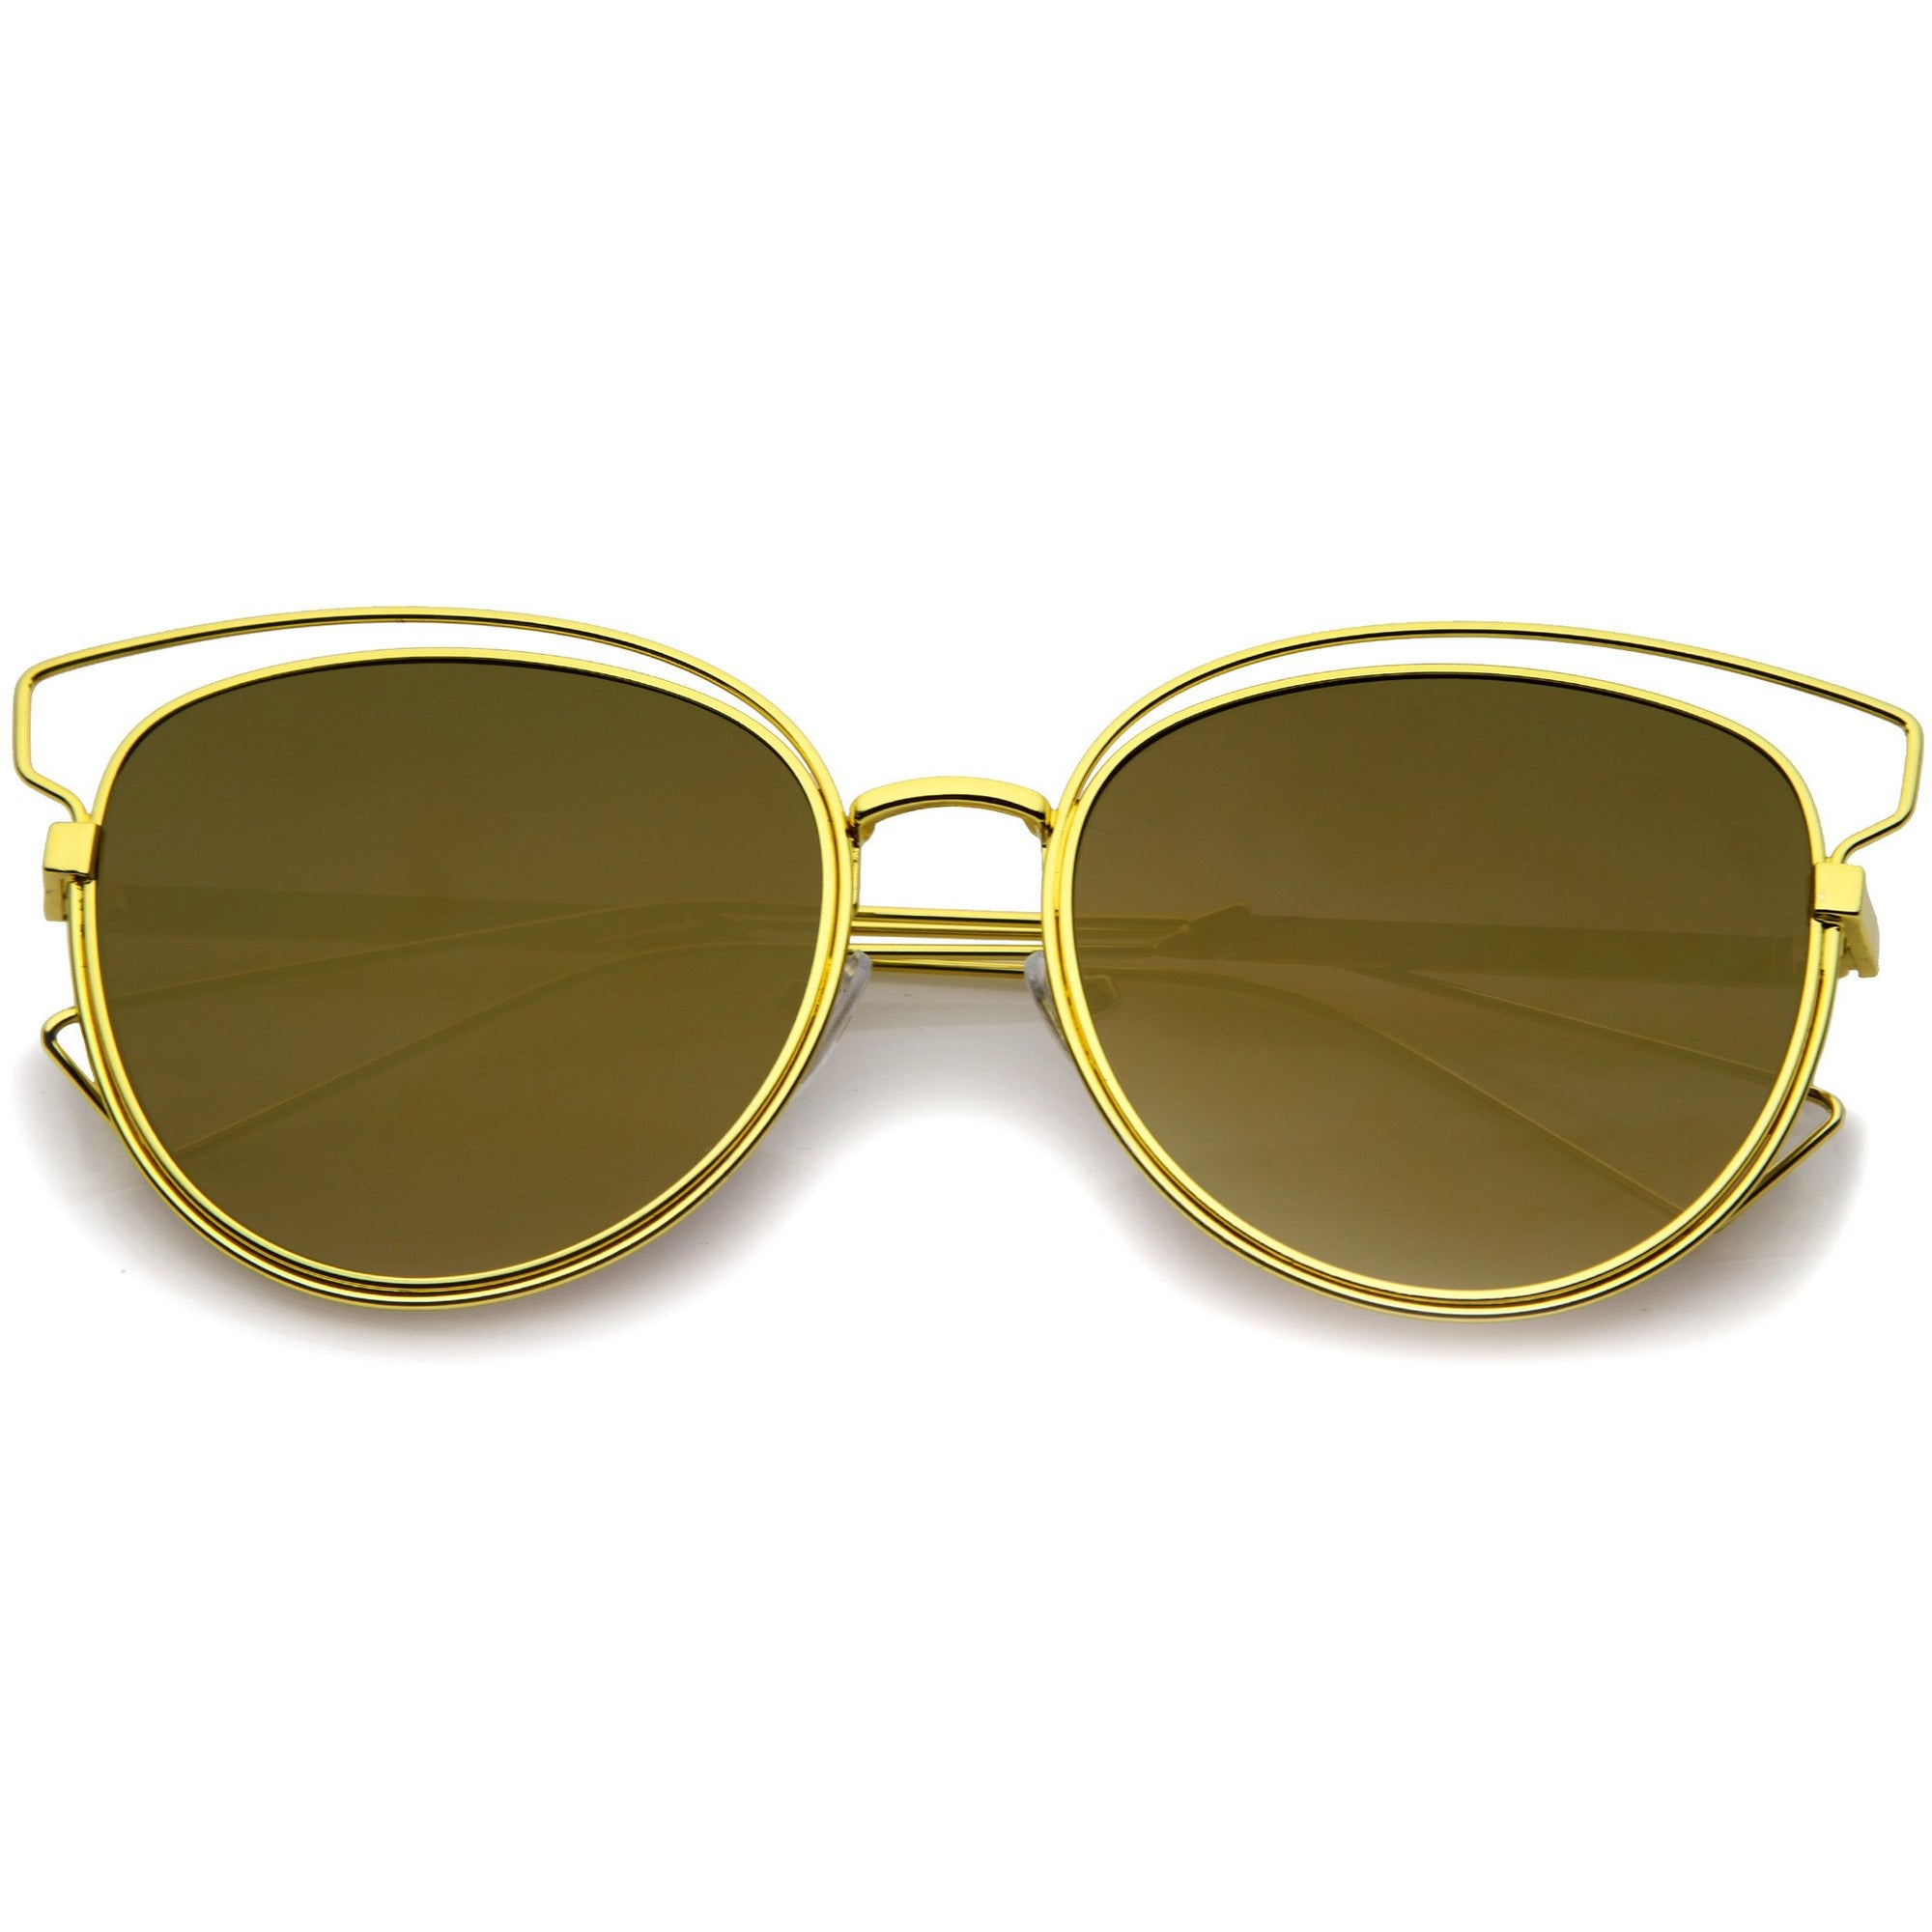 white cateye sunglasses with gold mirrored lenses